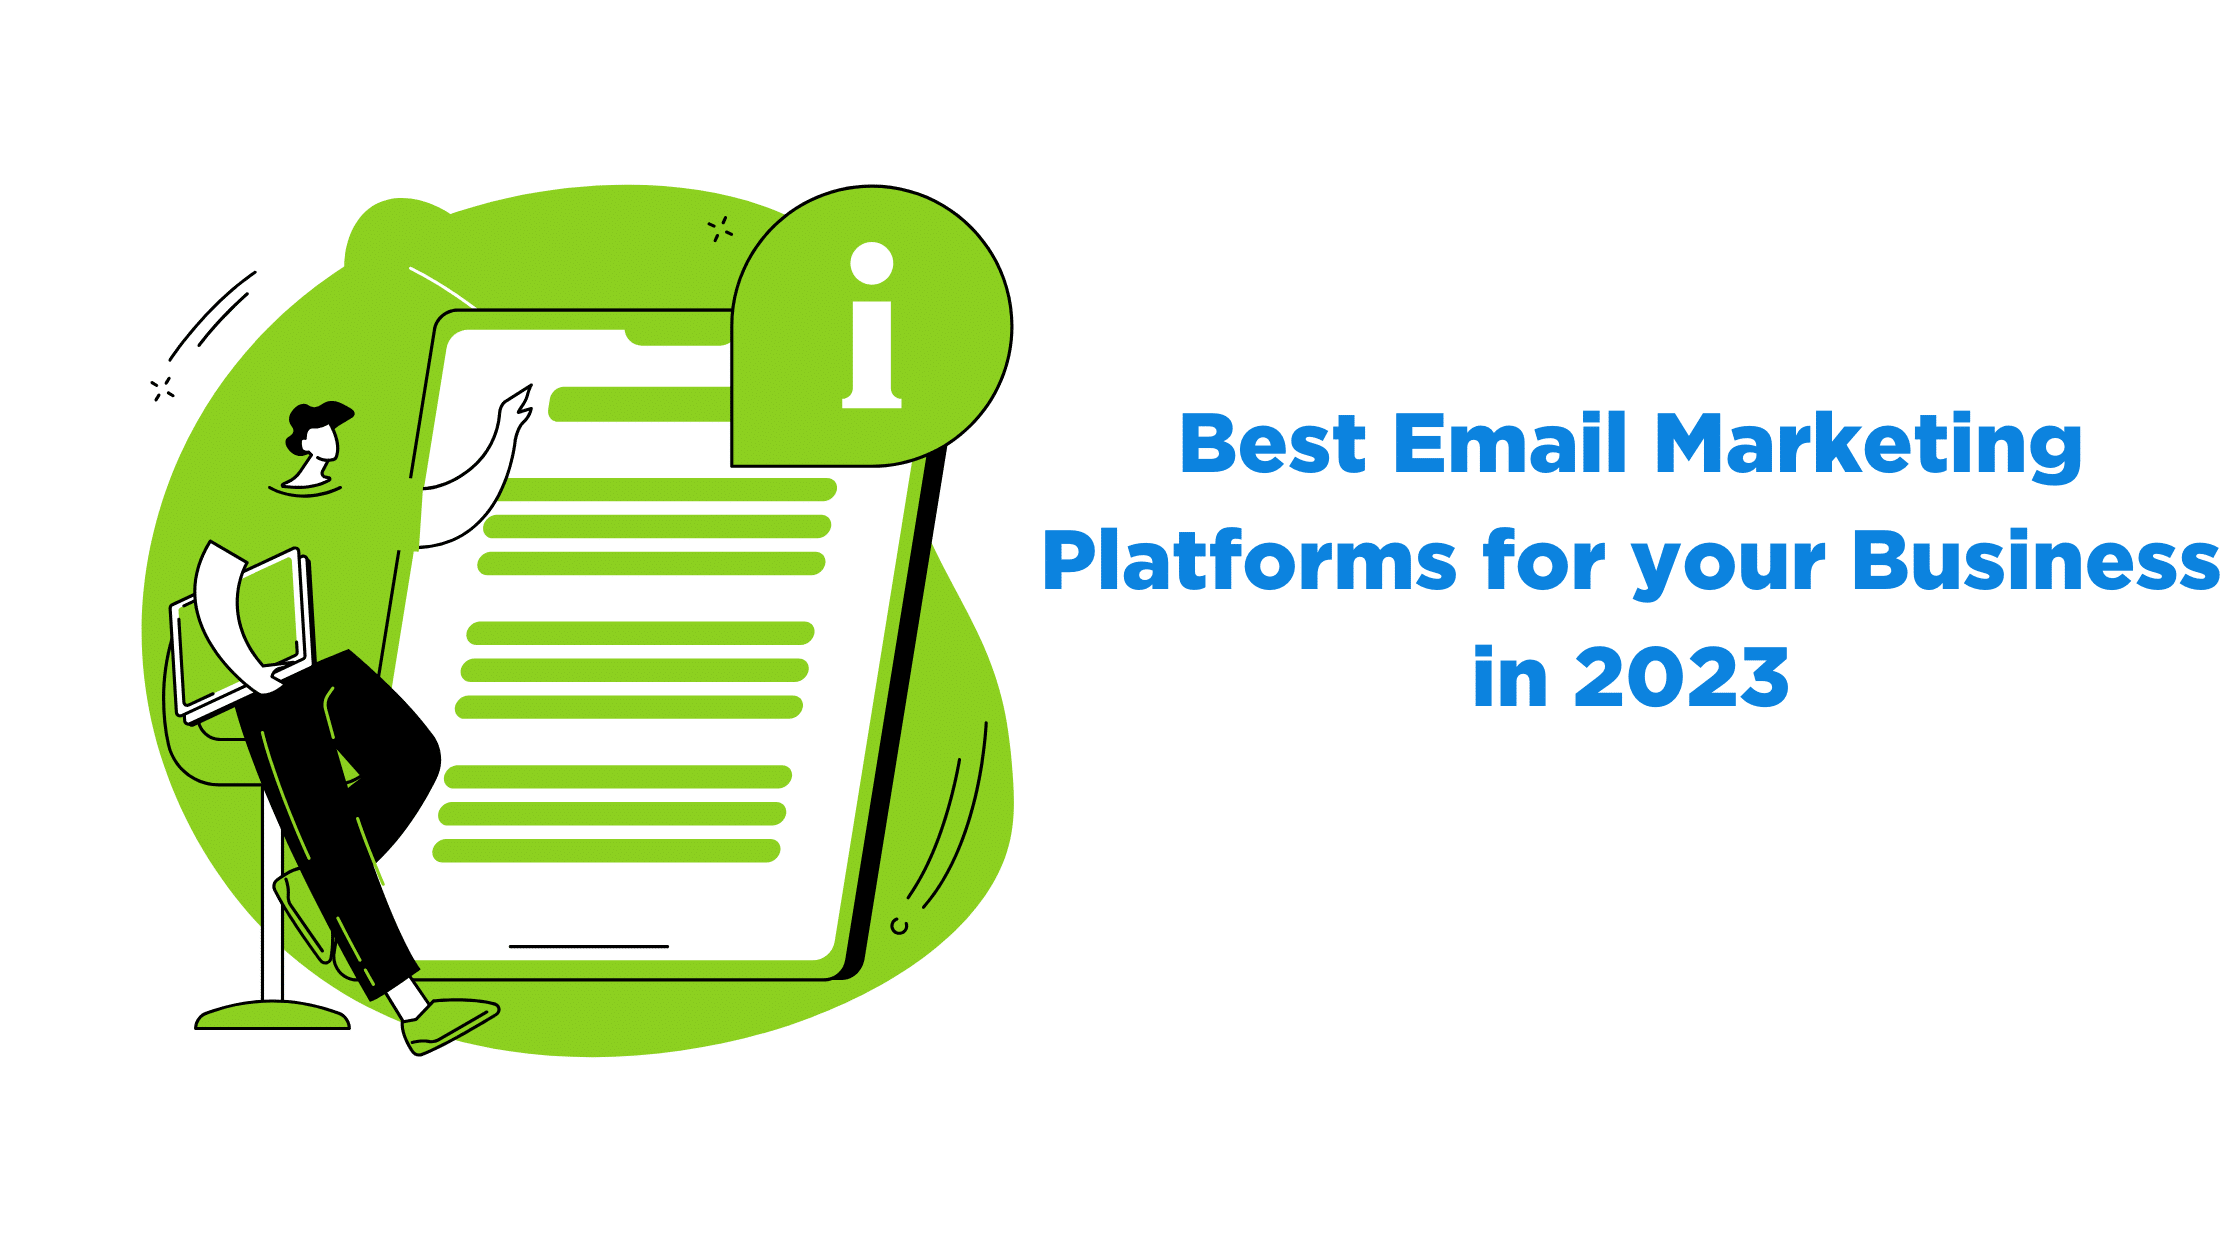 Best Email Marketing Platforms for Your Business in 2023